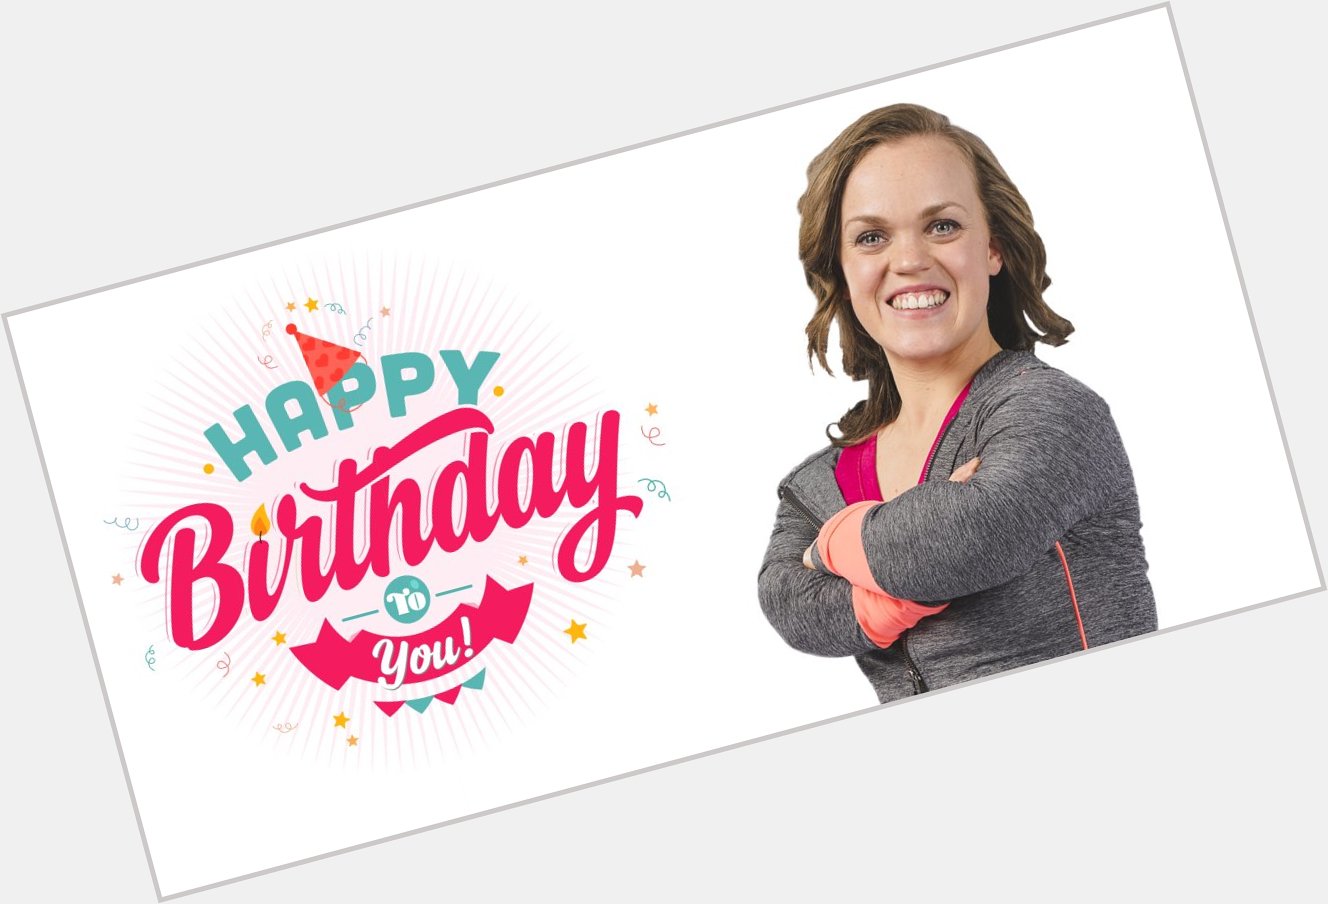 Happy Ellie Simmonds from all of us at Vitality. Leave your birthday wishes for  . 